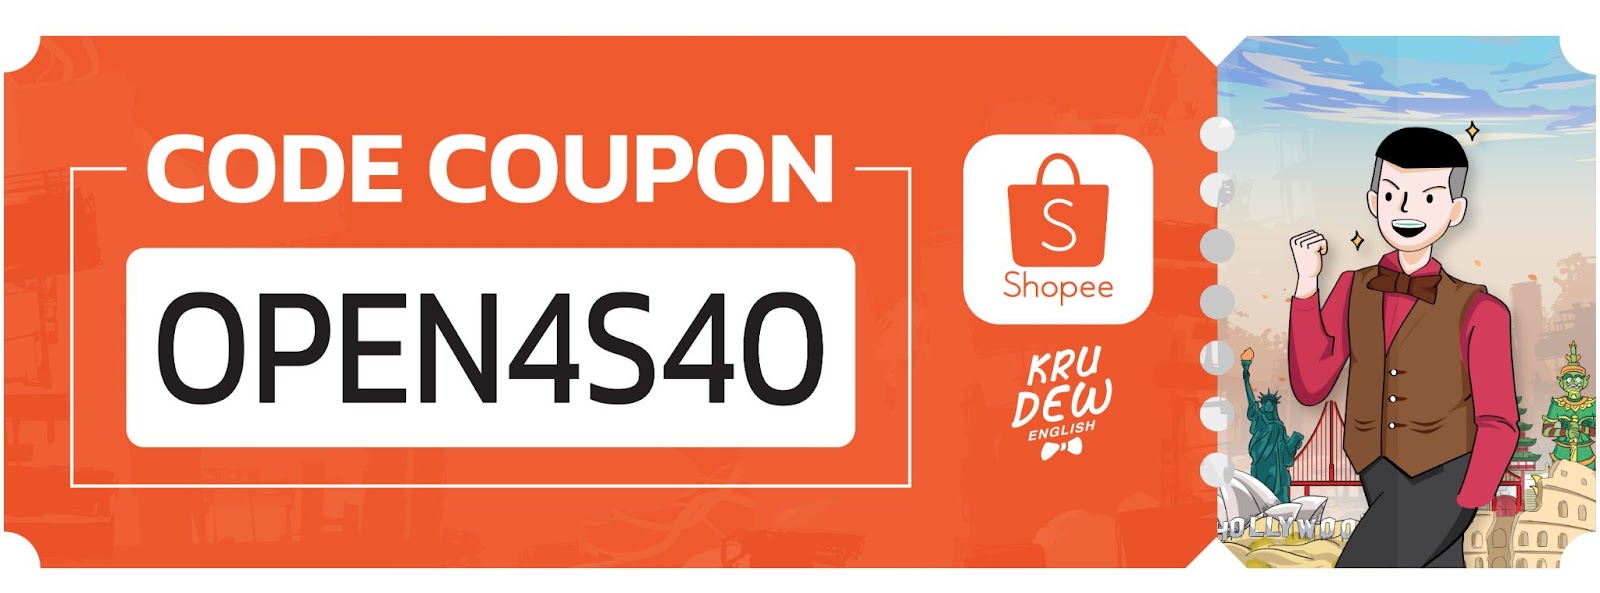 a printed orange code coupon with a Shopee logo